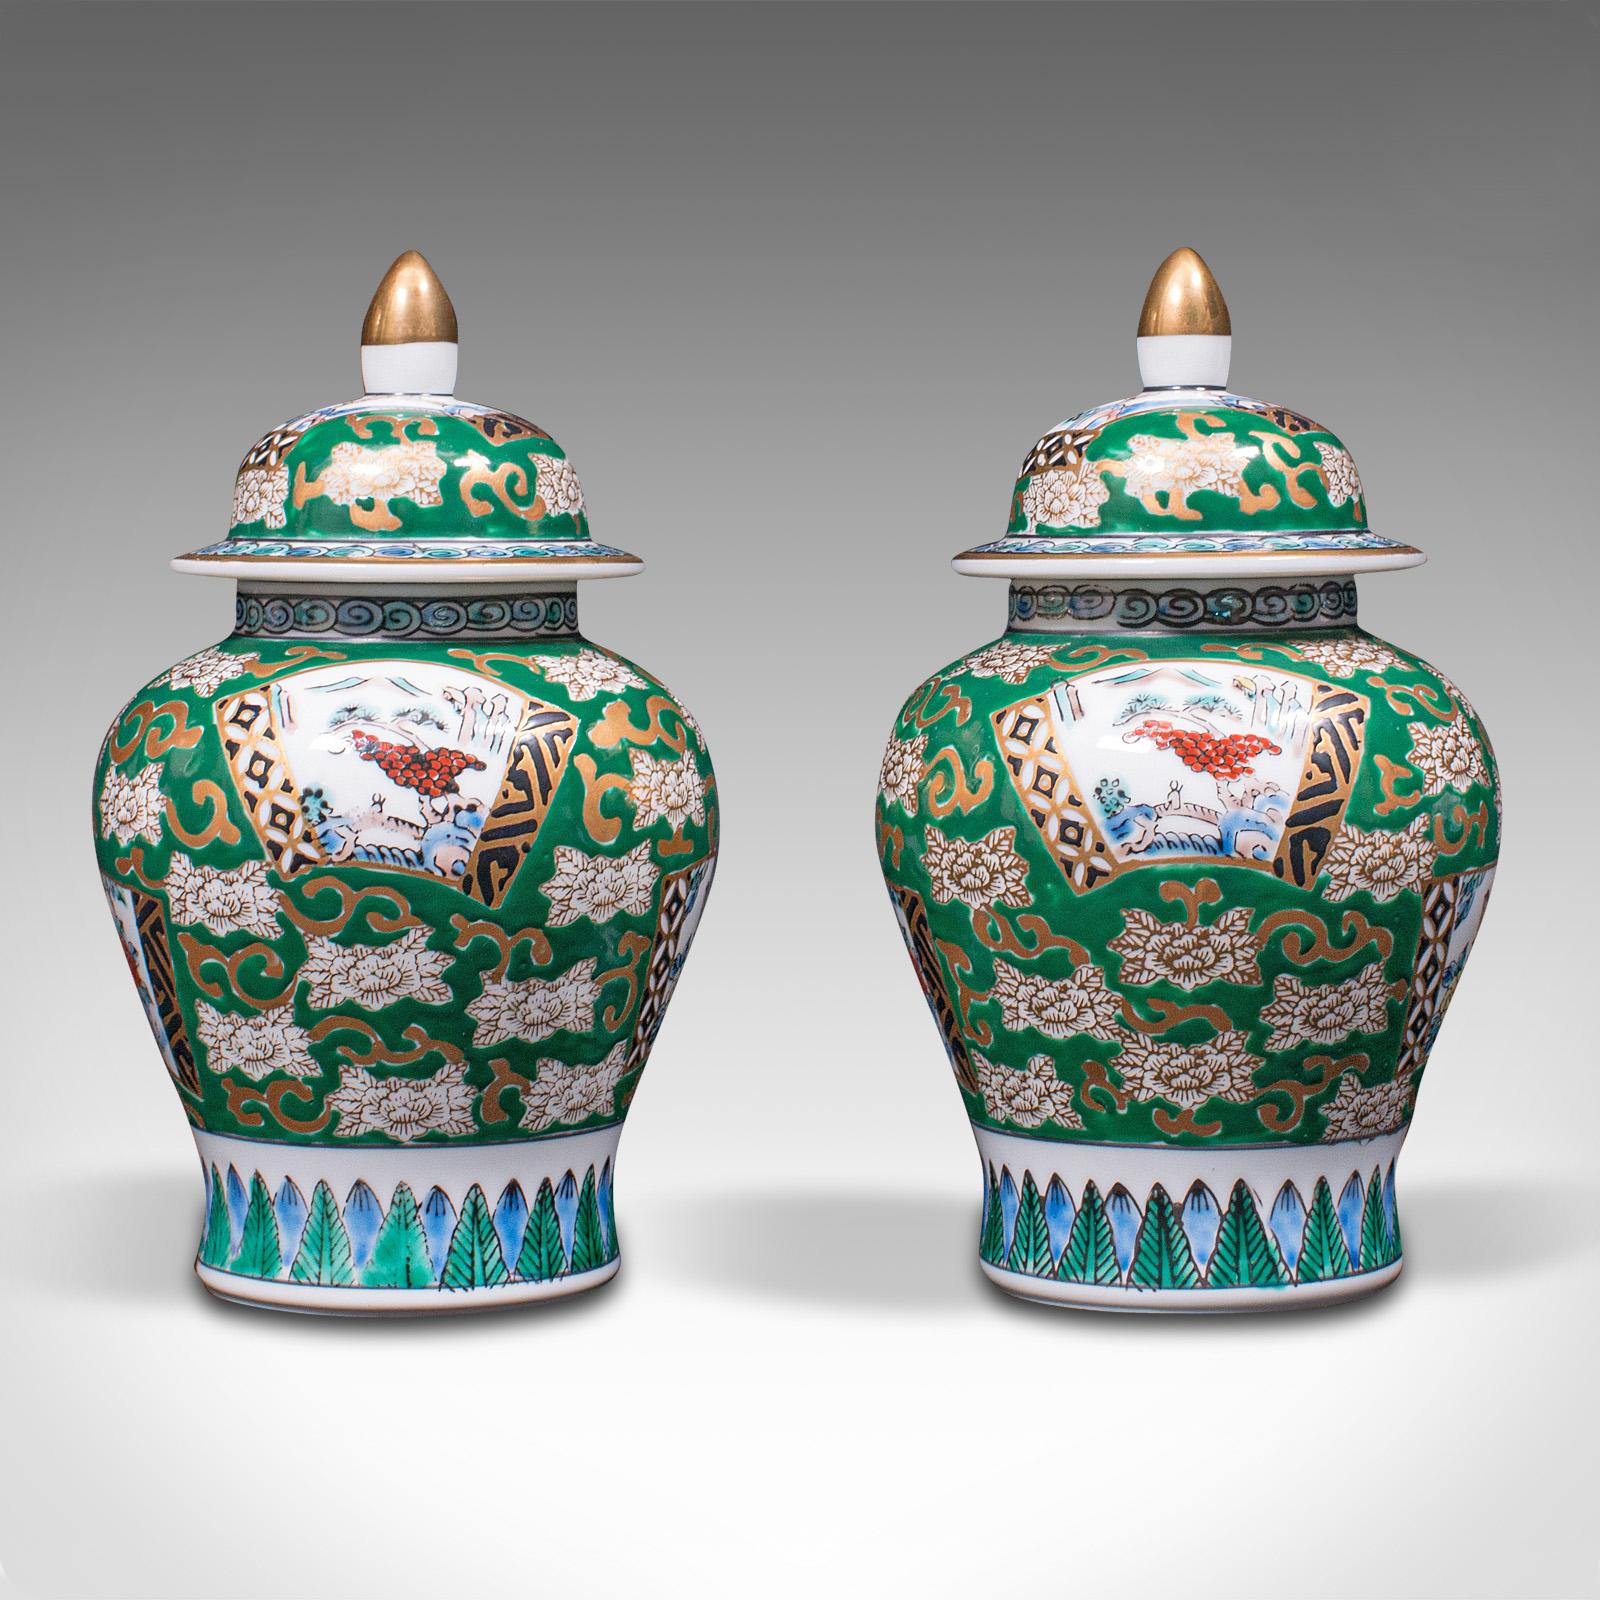 This is a pair of vintage ginger jars. A Chinese, hand painted ceramic spice pot, dating to the Art Deco period, circa 1940.

Appealing colour and bulbous forms
Displaying a desirable aged patina and in good order
Hand-painted ceramic with